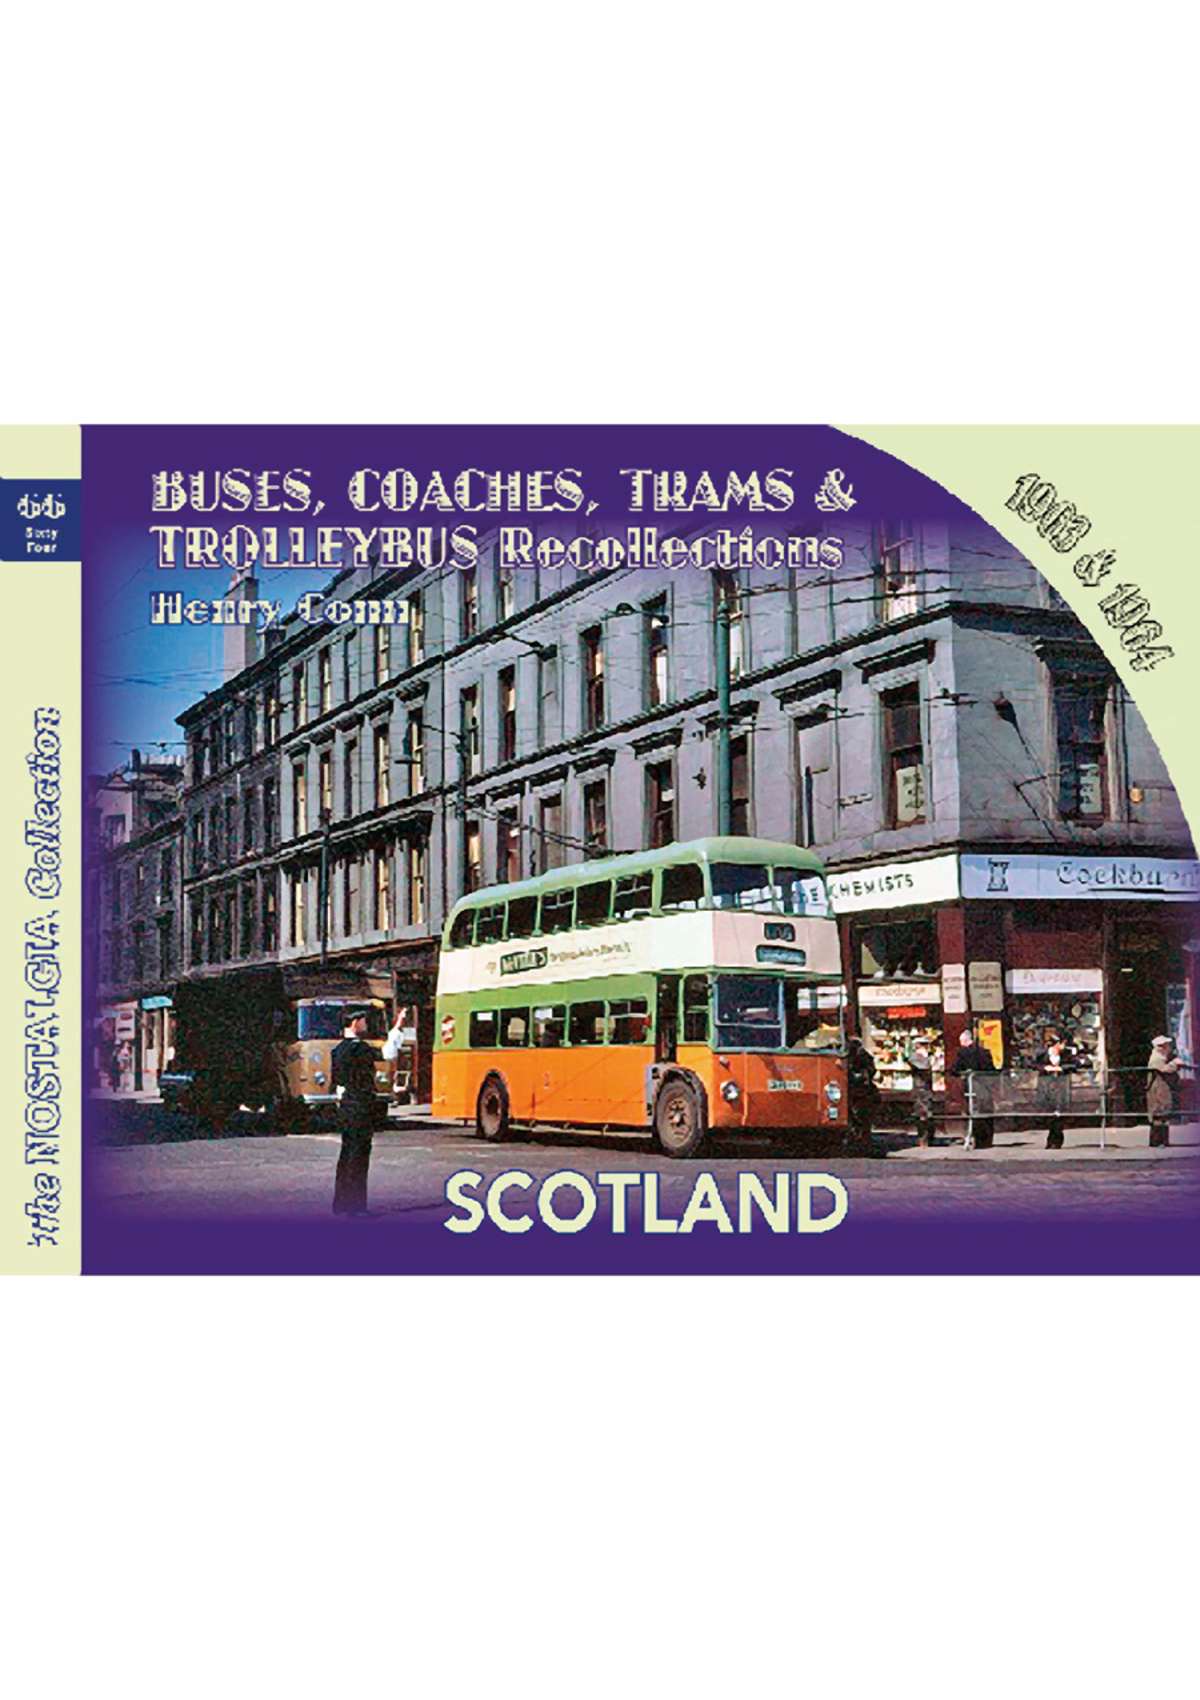 No 66 Buses, Coaches, Trams and Trolleybus Recollections SCOTLAND 1963 and 1964